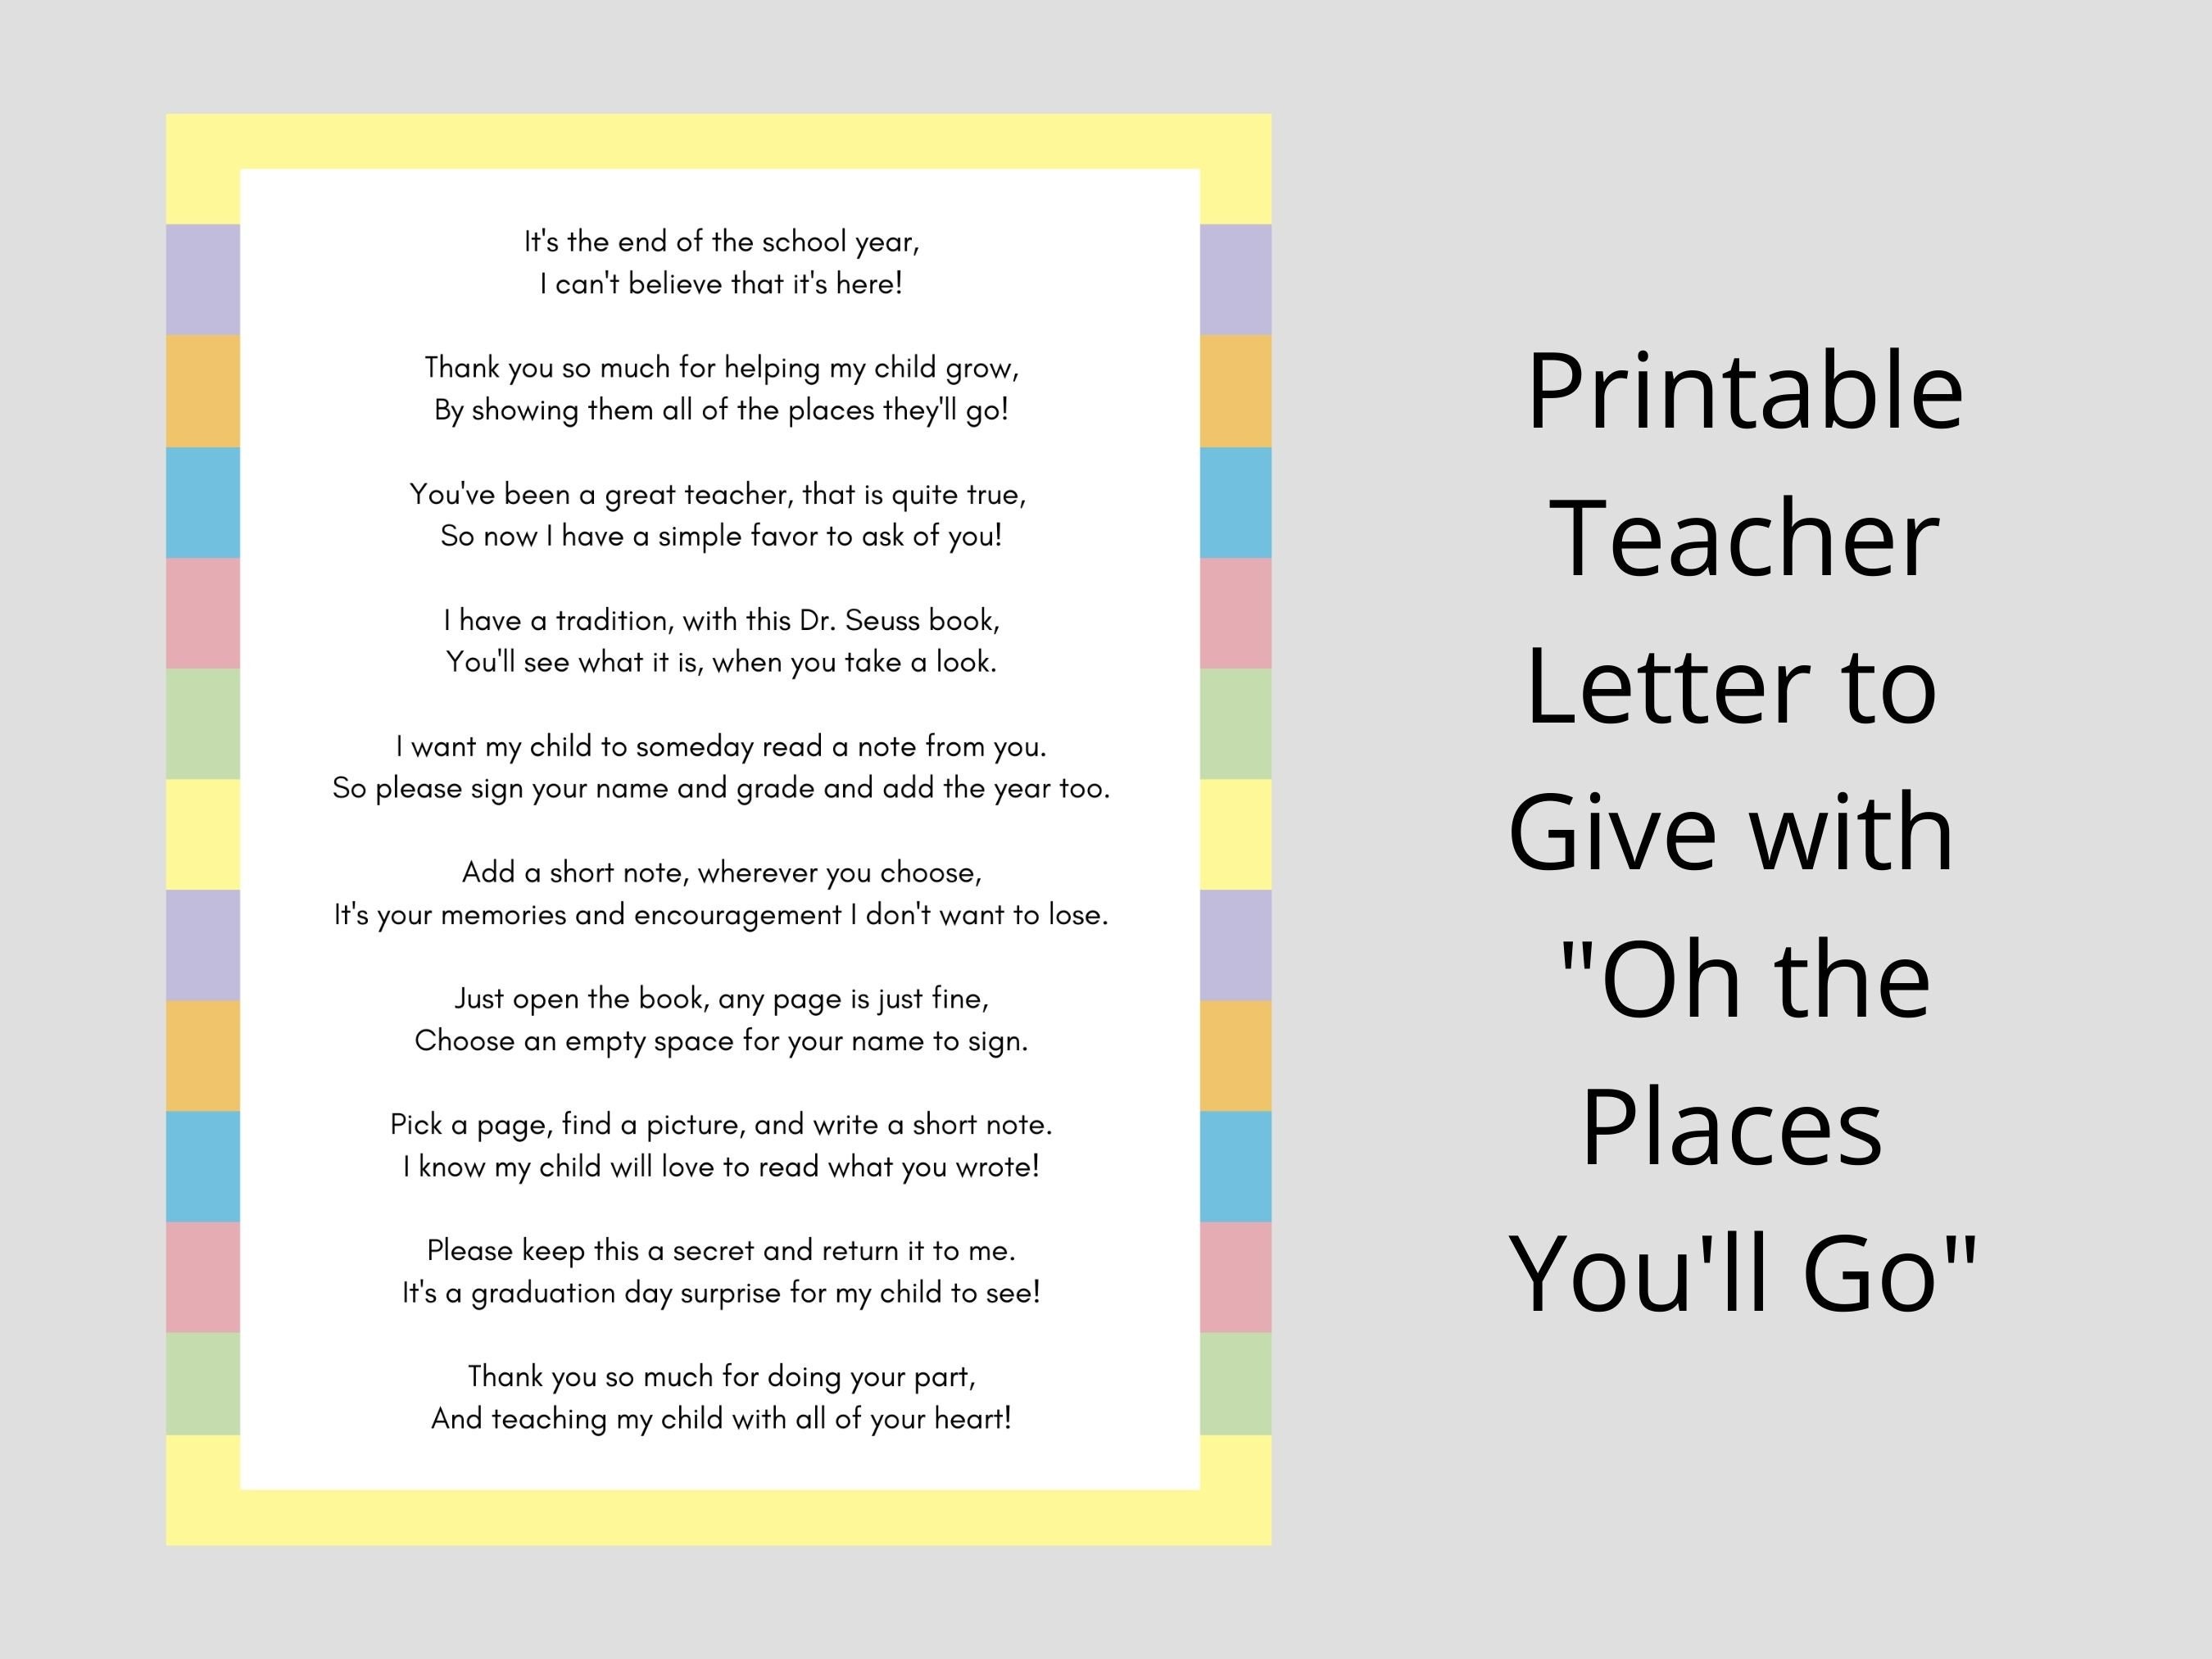 teacher-letter-for-oh-the-places-you-ll-go-by-dr-seuss-etsy-canada